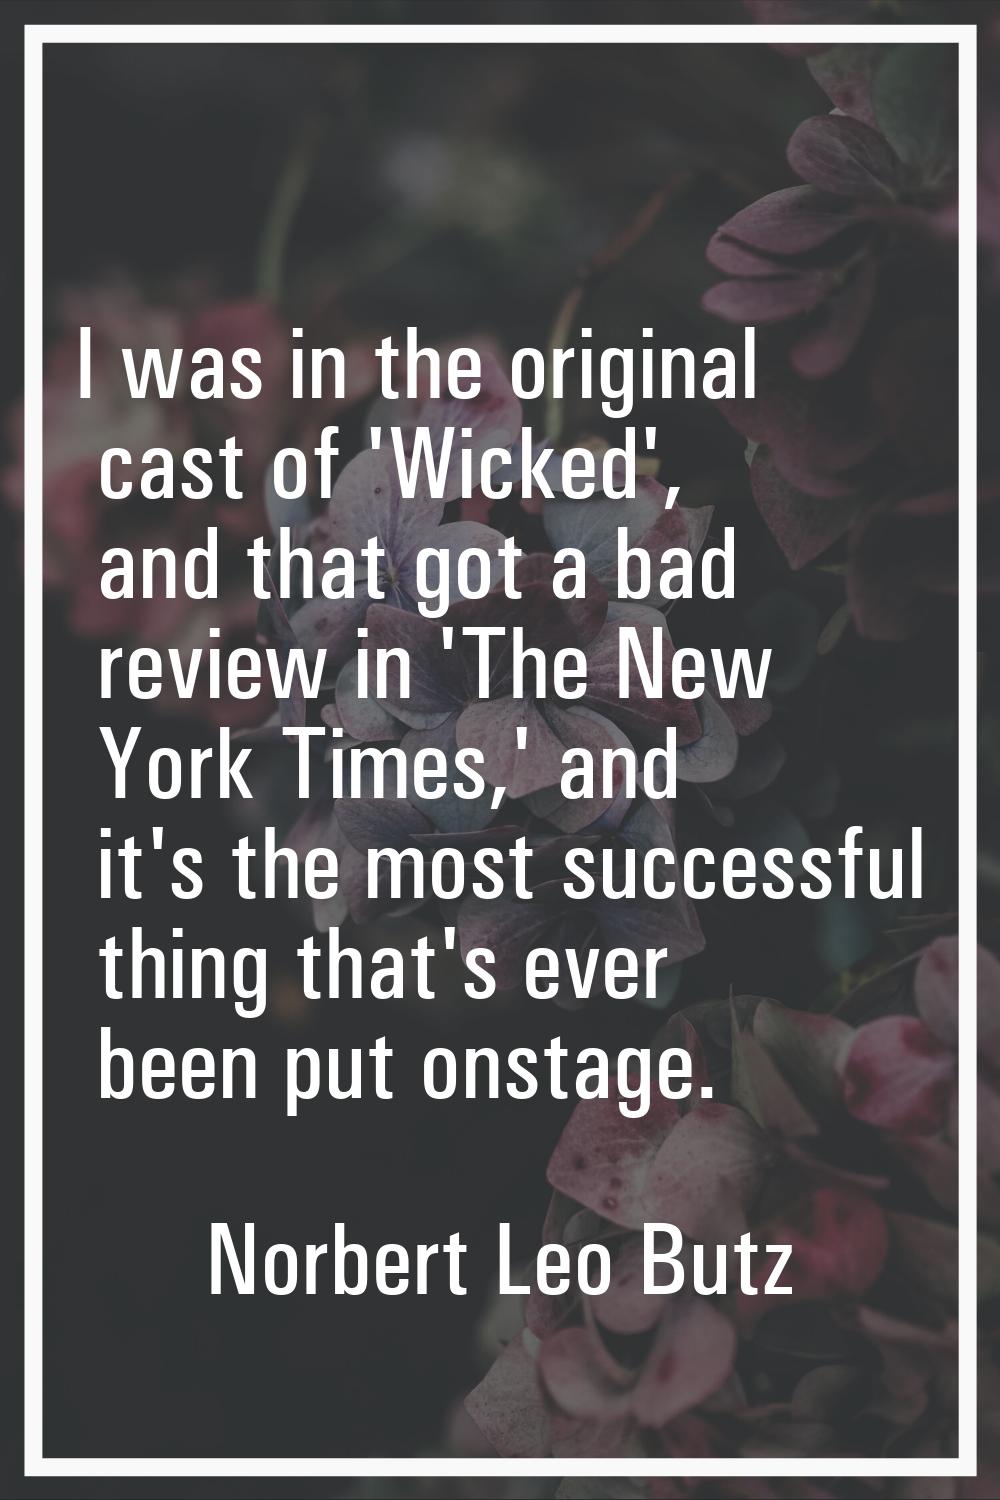 I was in the original cast of 'Wicked', and that got a bad review in 'The New York Times,' and it's